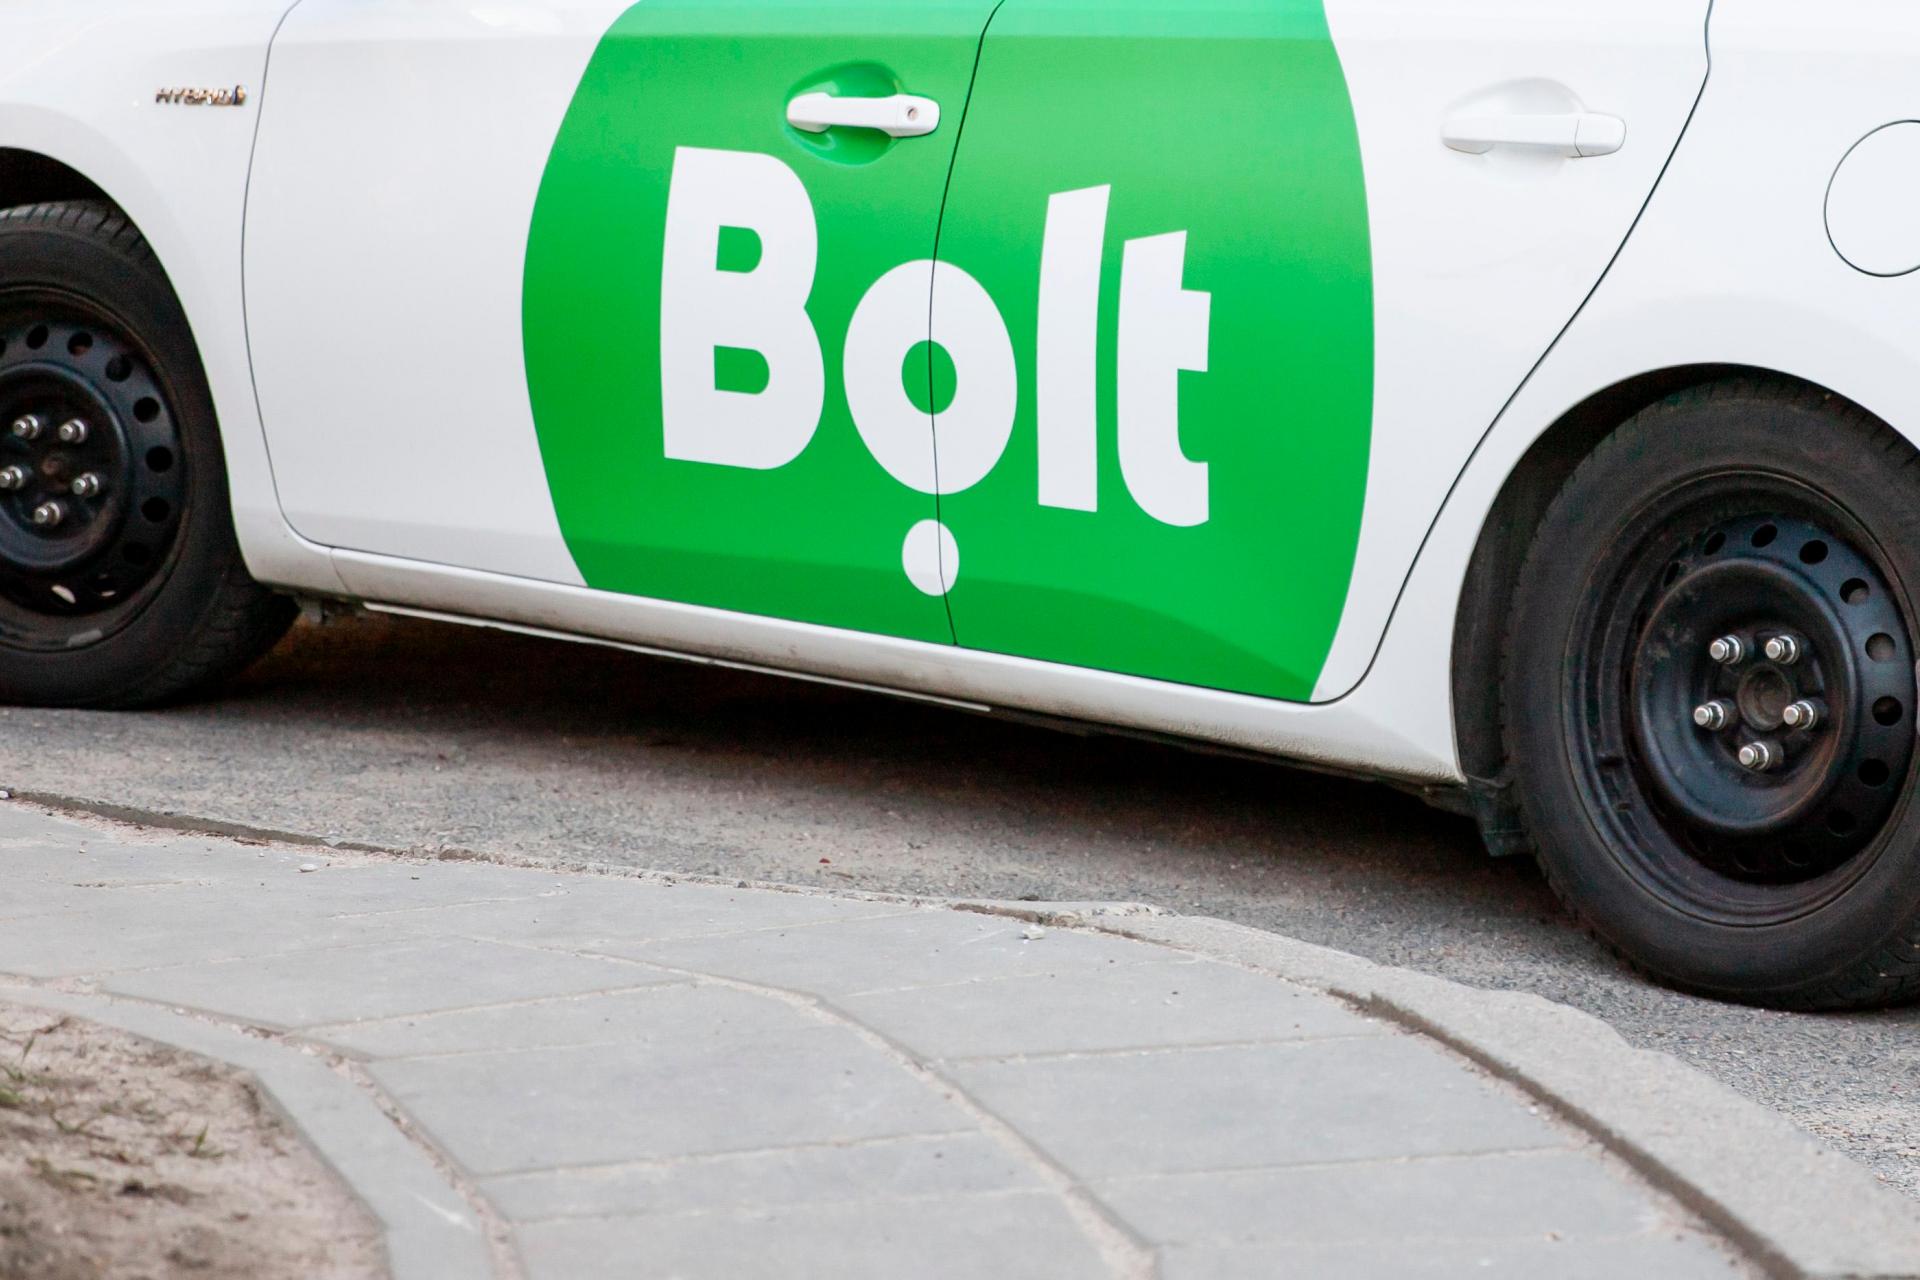 Founded as Taxify eight years ago, Bolt had set a goal of bringing ride-hailing to developing markets and countries.